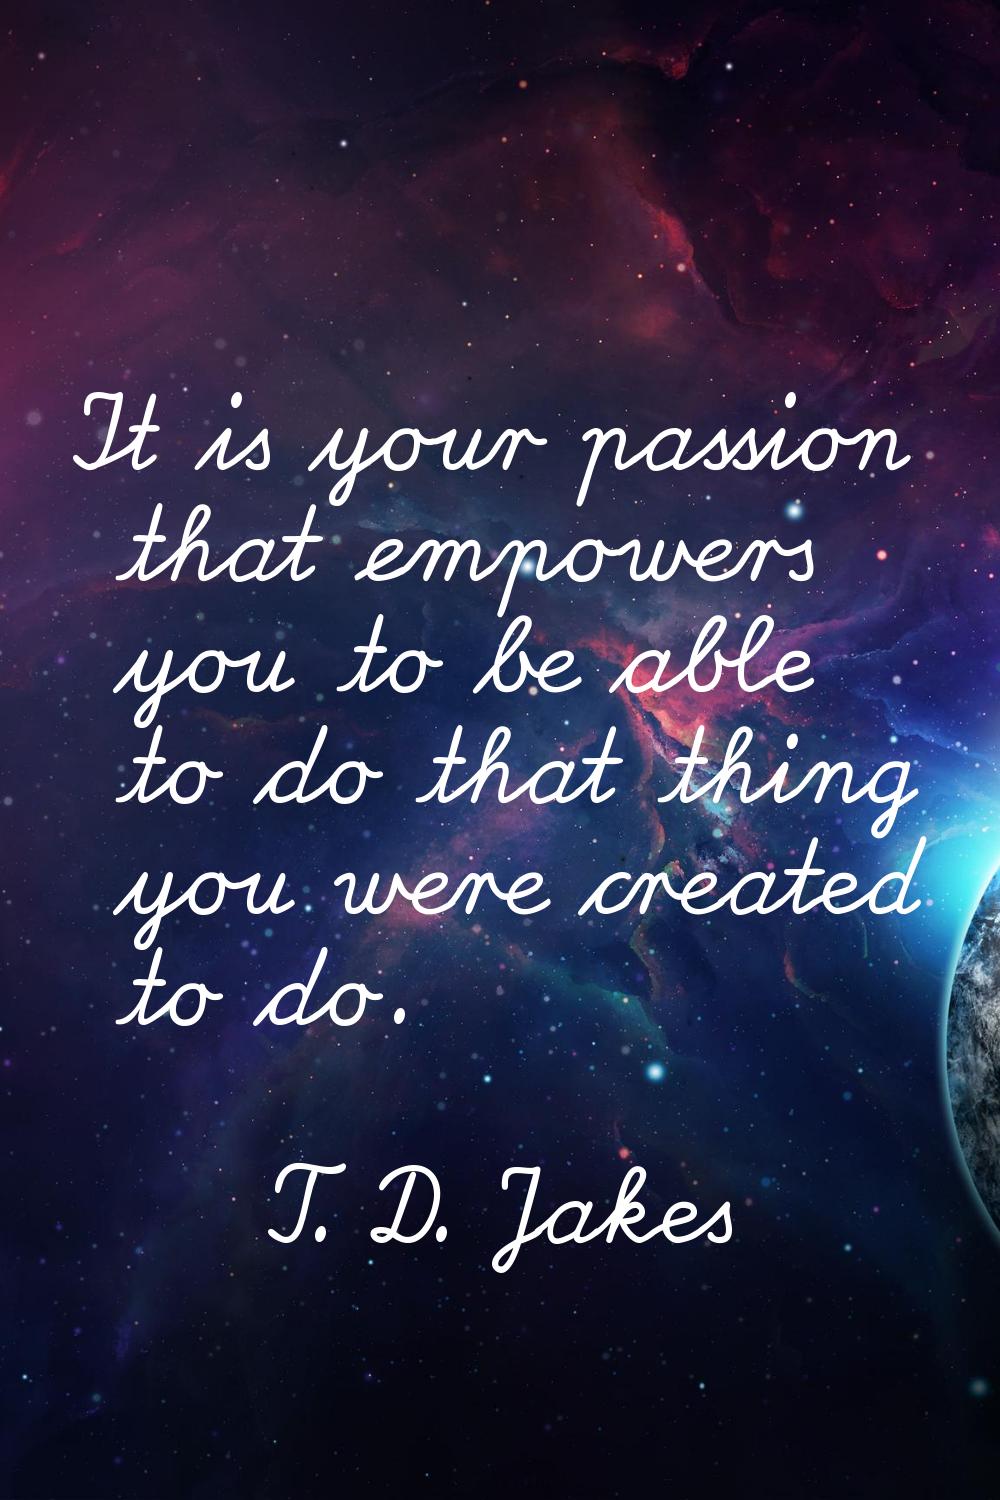 It is your passion that empowers you to be able to do that thing you were created to do.